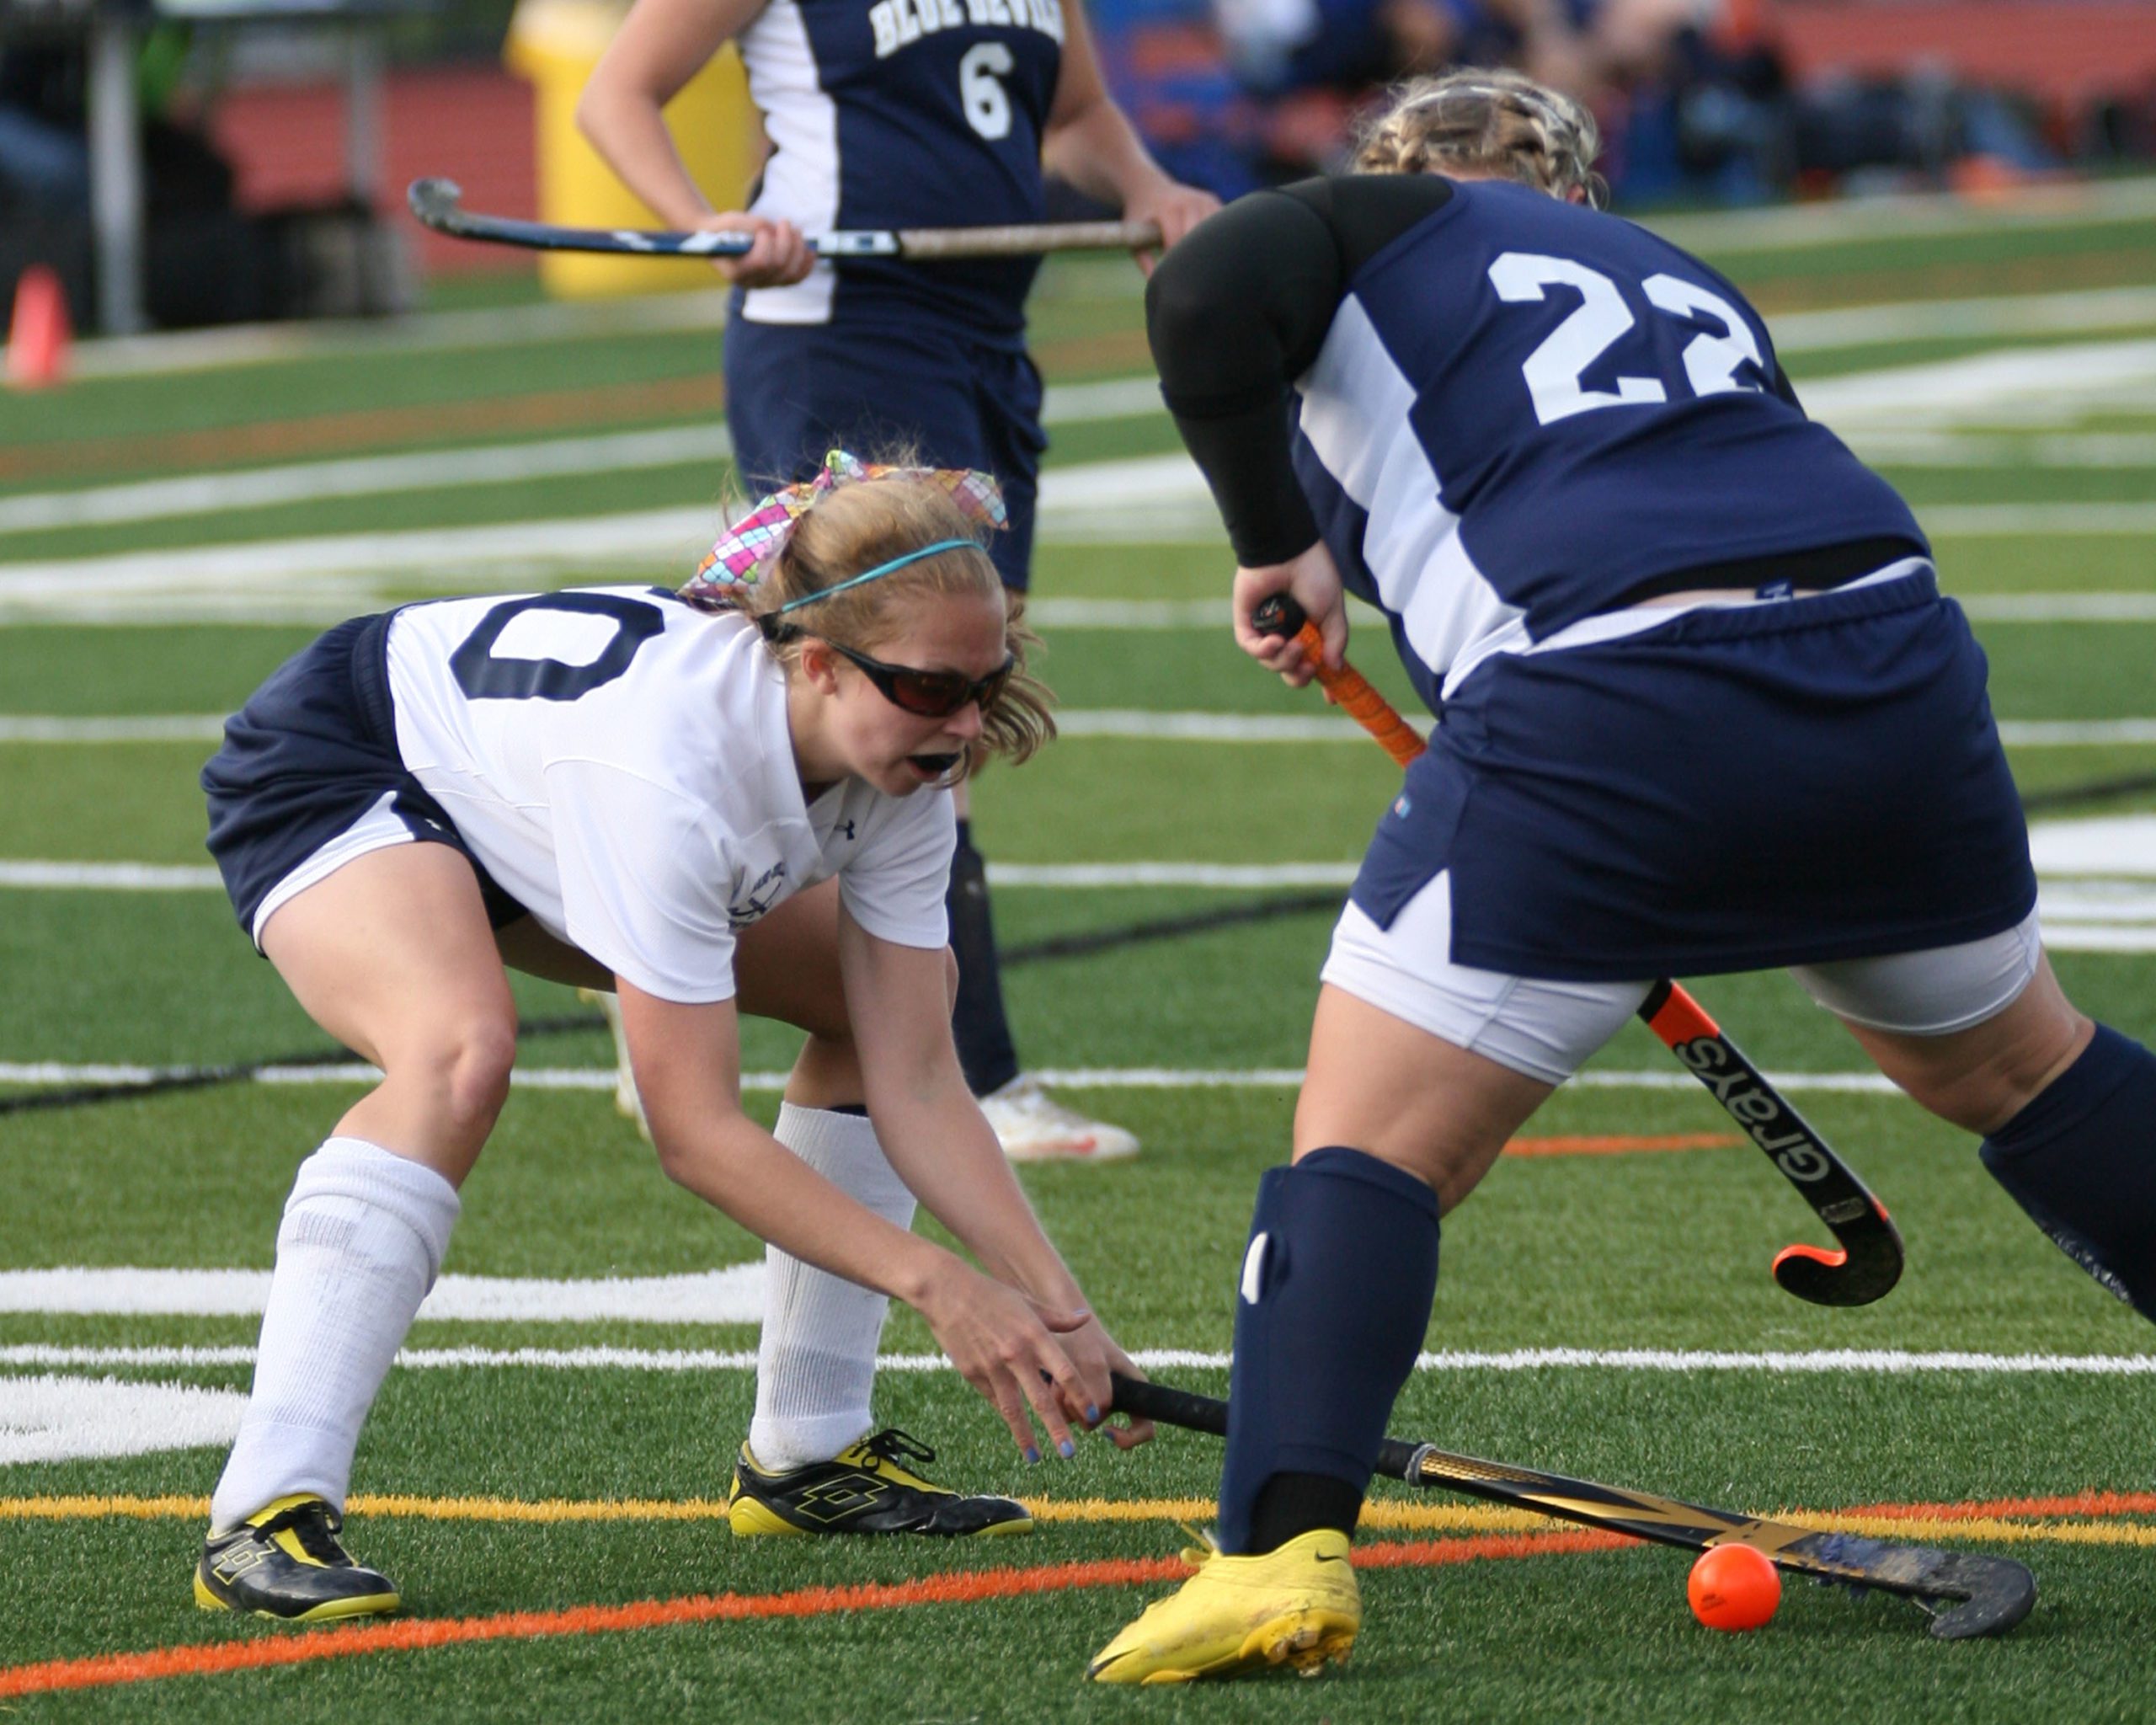 Woman's field hockey game in action